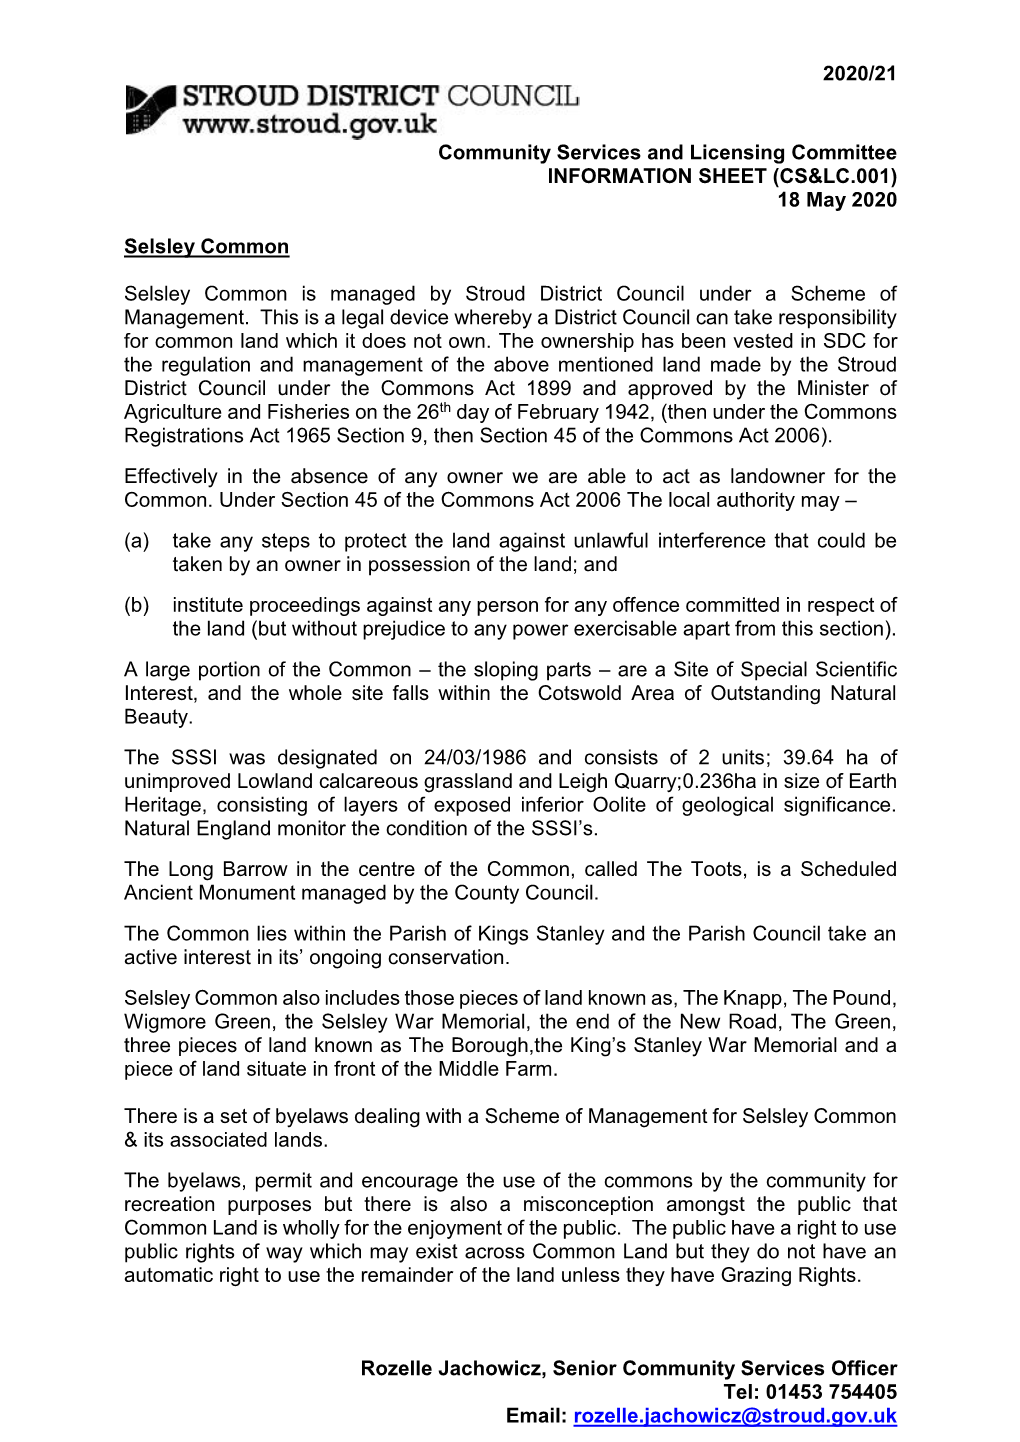 Selsley Common Information Sheet